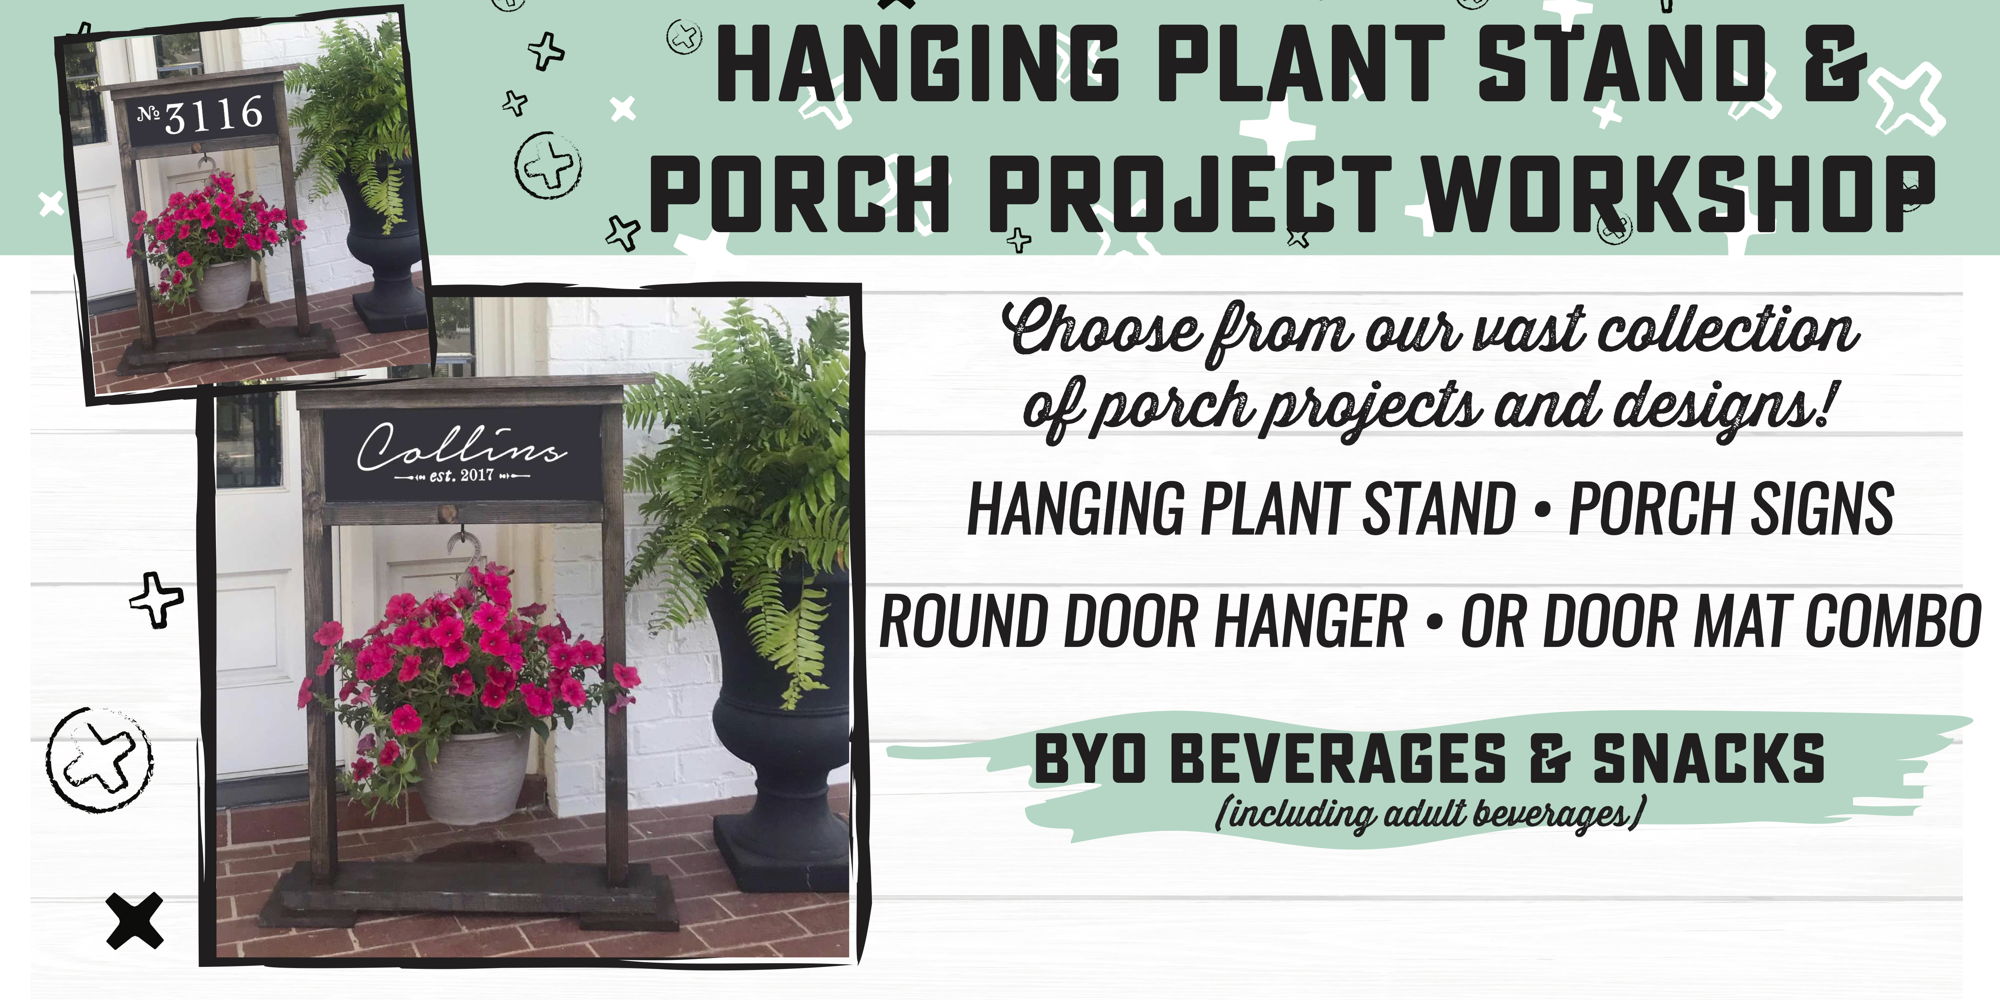 Specialty - Hanging Plant Stand and Porch Project Workshop promotional image